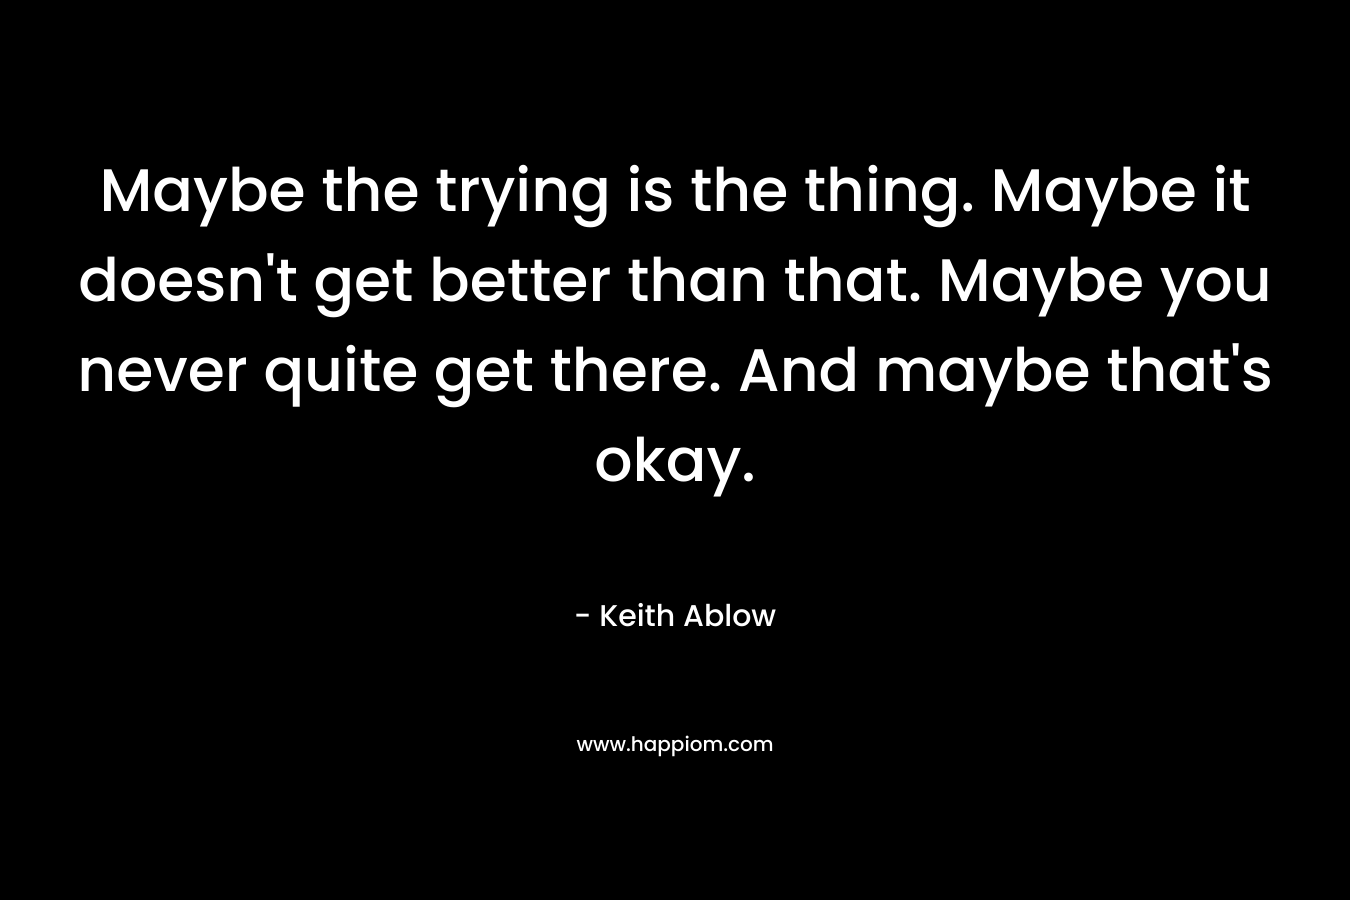 Maybe the trying is the thing. Maybe it doesn't get better than that. Maybe you never quite get there. And maybe that's okay.